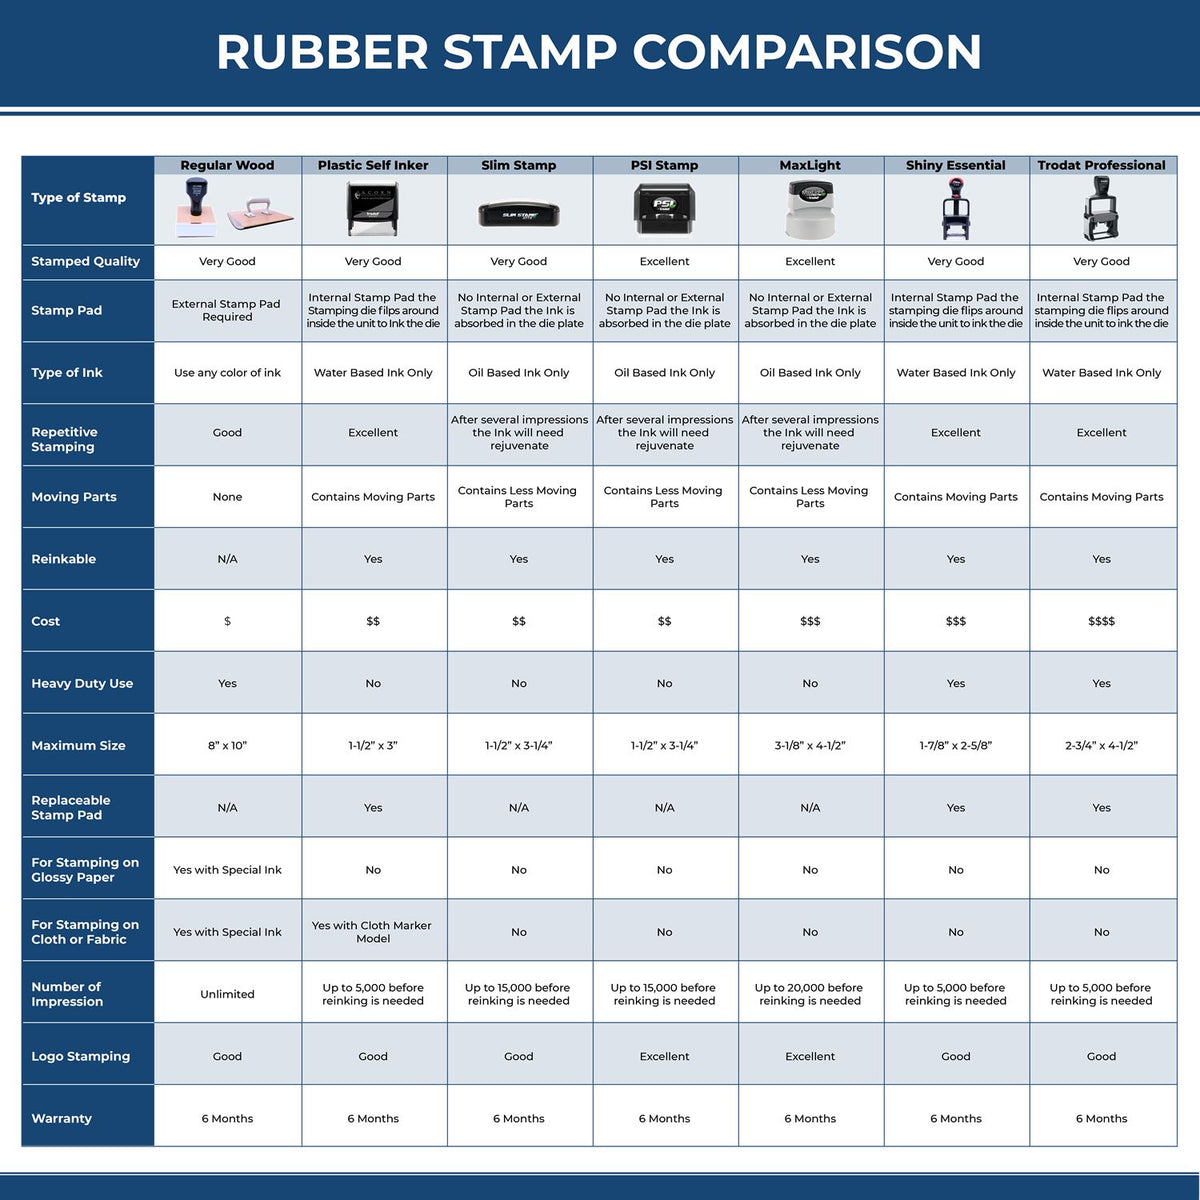 Large Self Inking Distributed Stamp 4118S Rubber Stamp Comparison